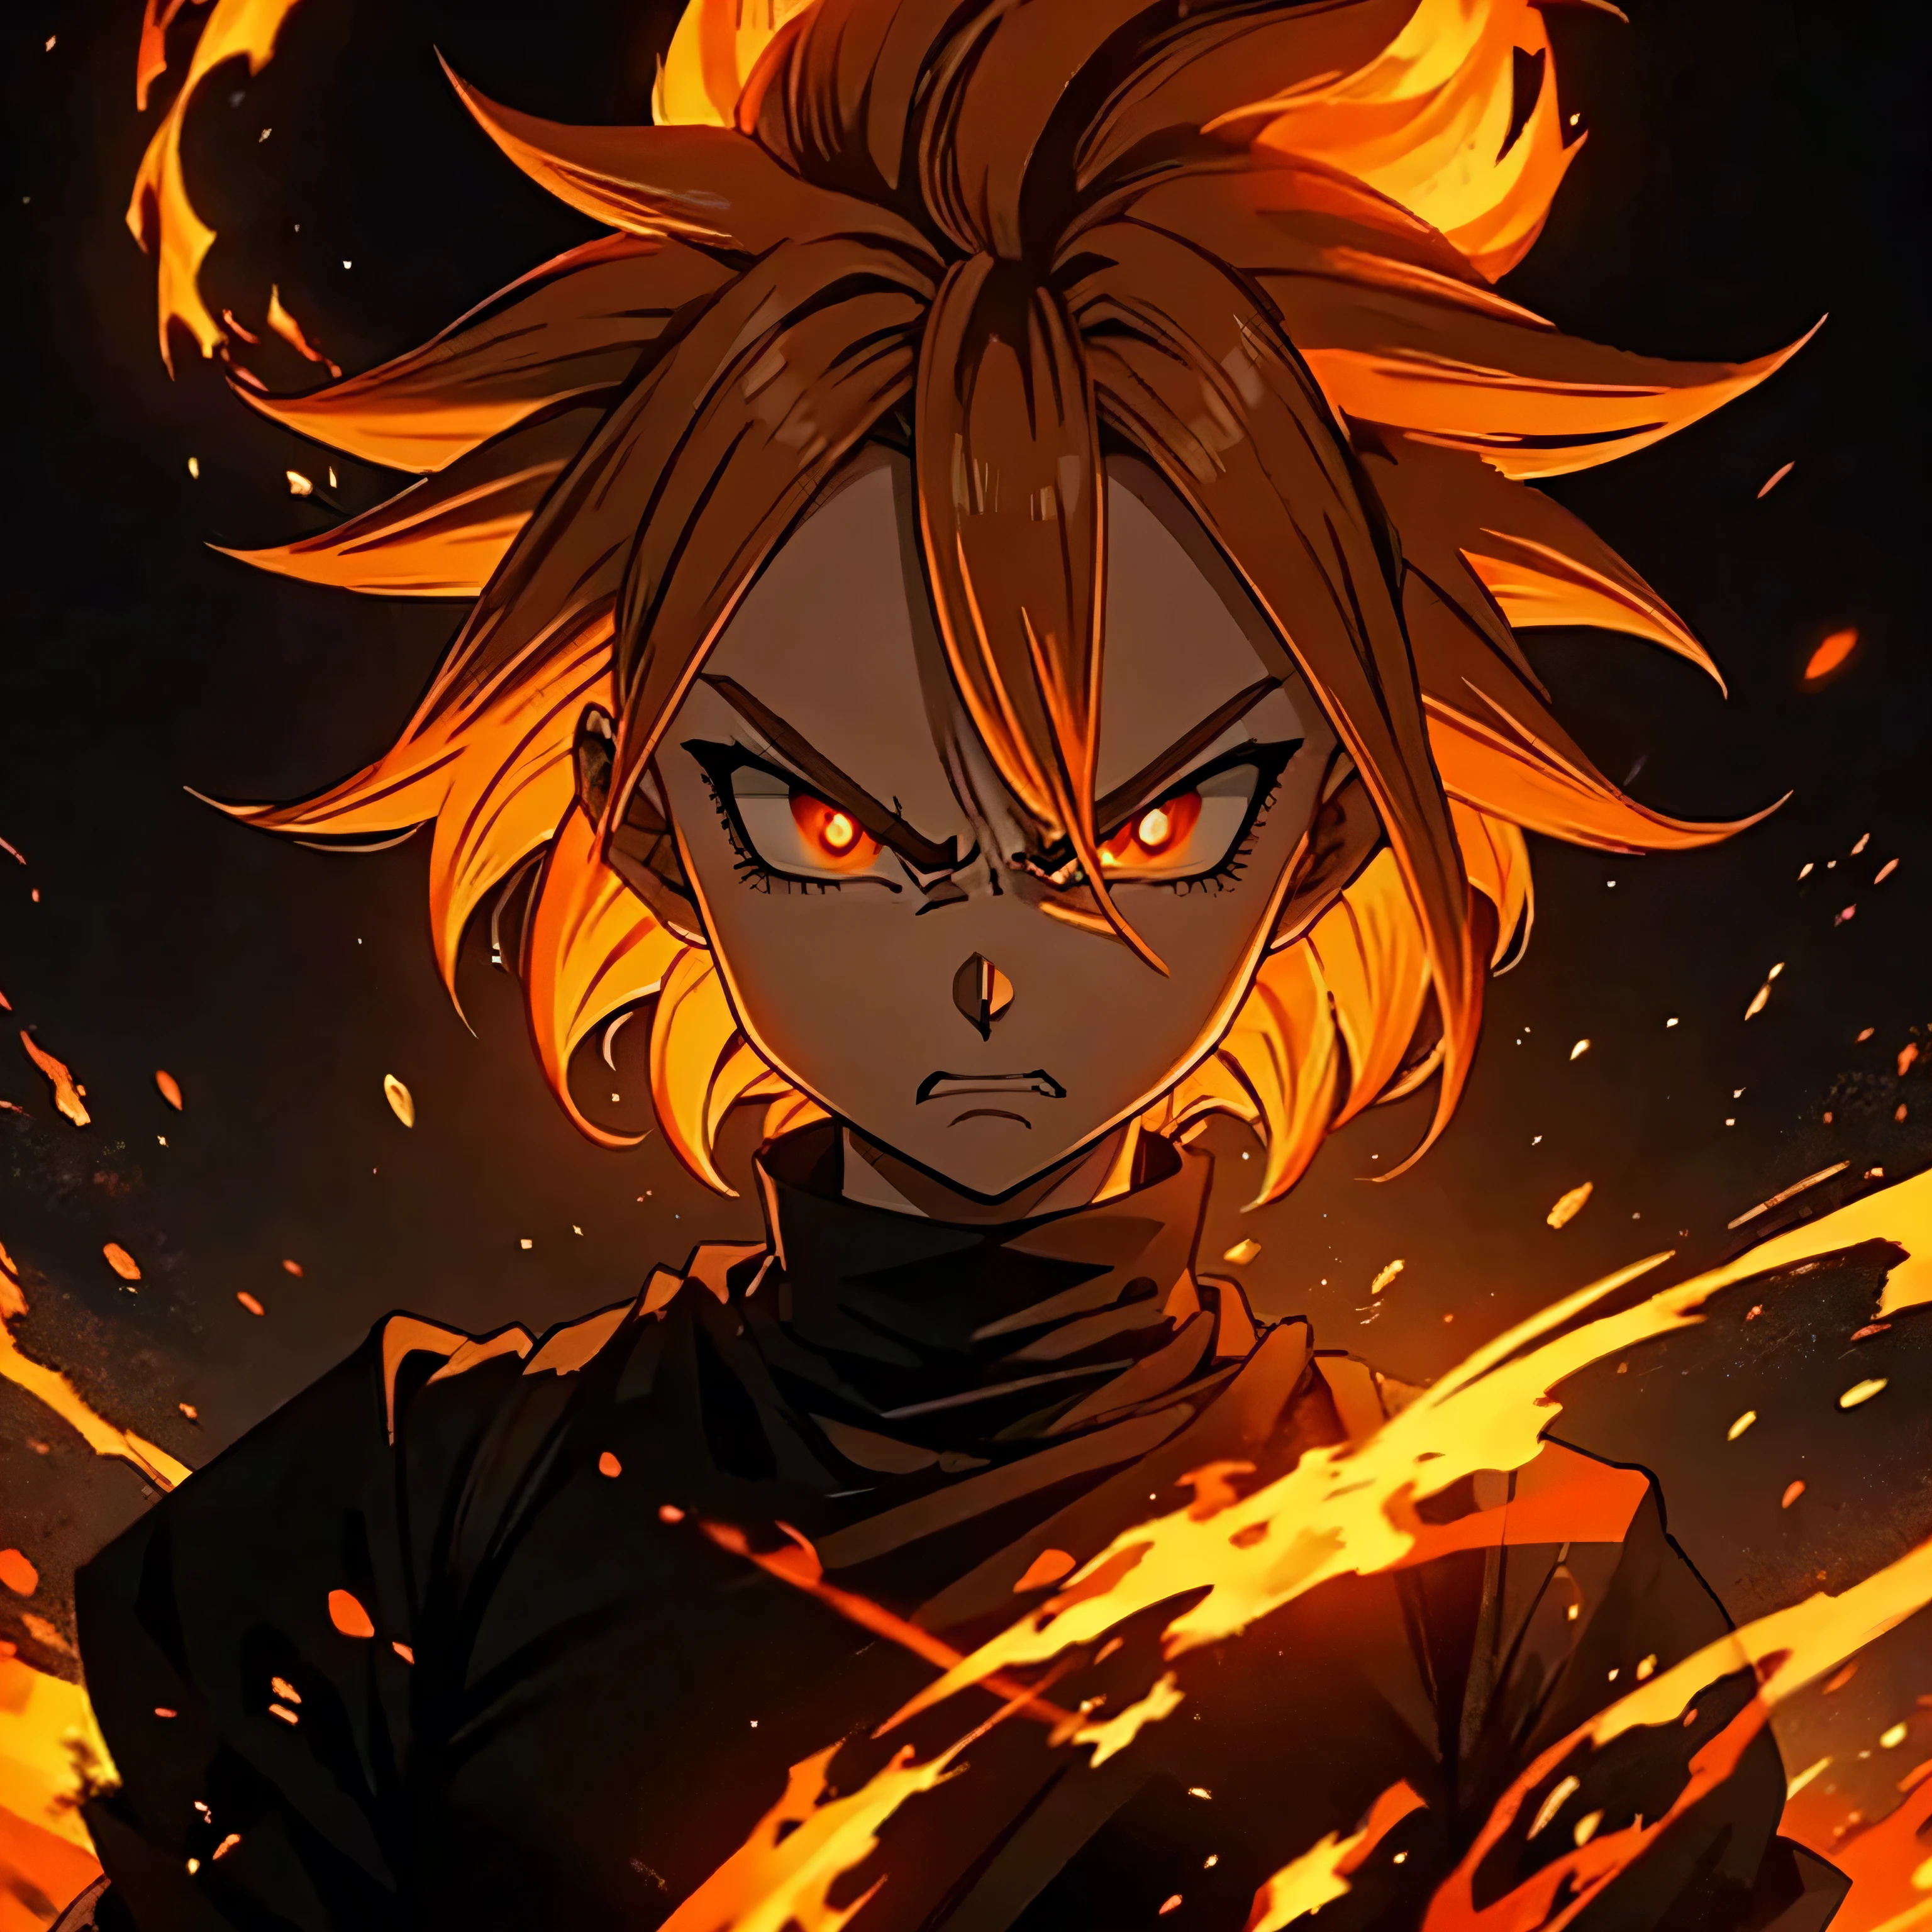 minimalistic, angry face, demon, only silhouette, dark shadow, glowing eyes, orange hair, with clean background, special effects, dragonball aura